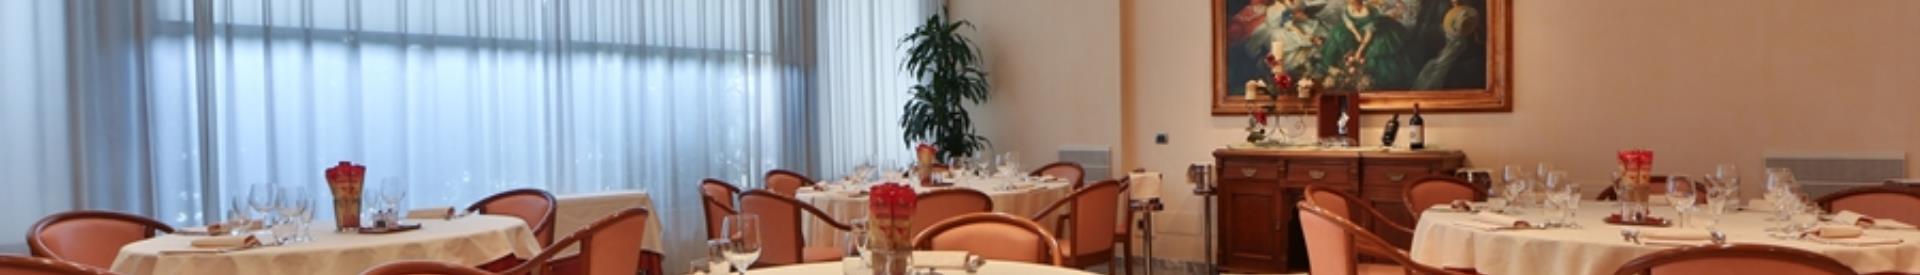 Open for lunch and dinner Restaurant meridians Forlì, ideal for business lunches and dinners. meat specialities, fish and regional